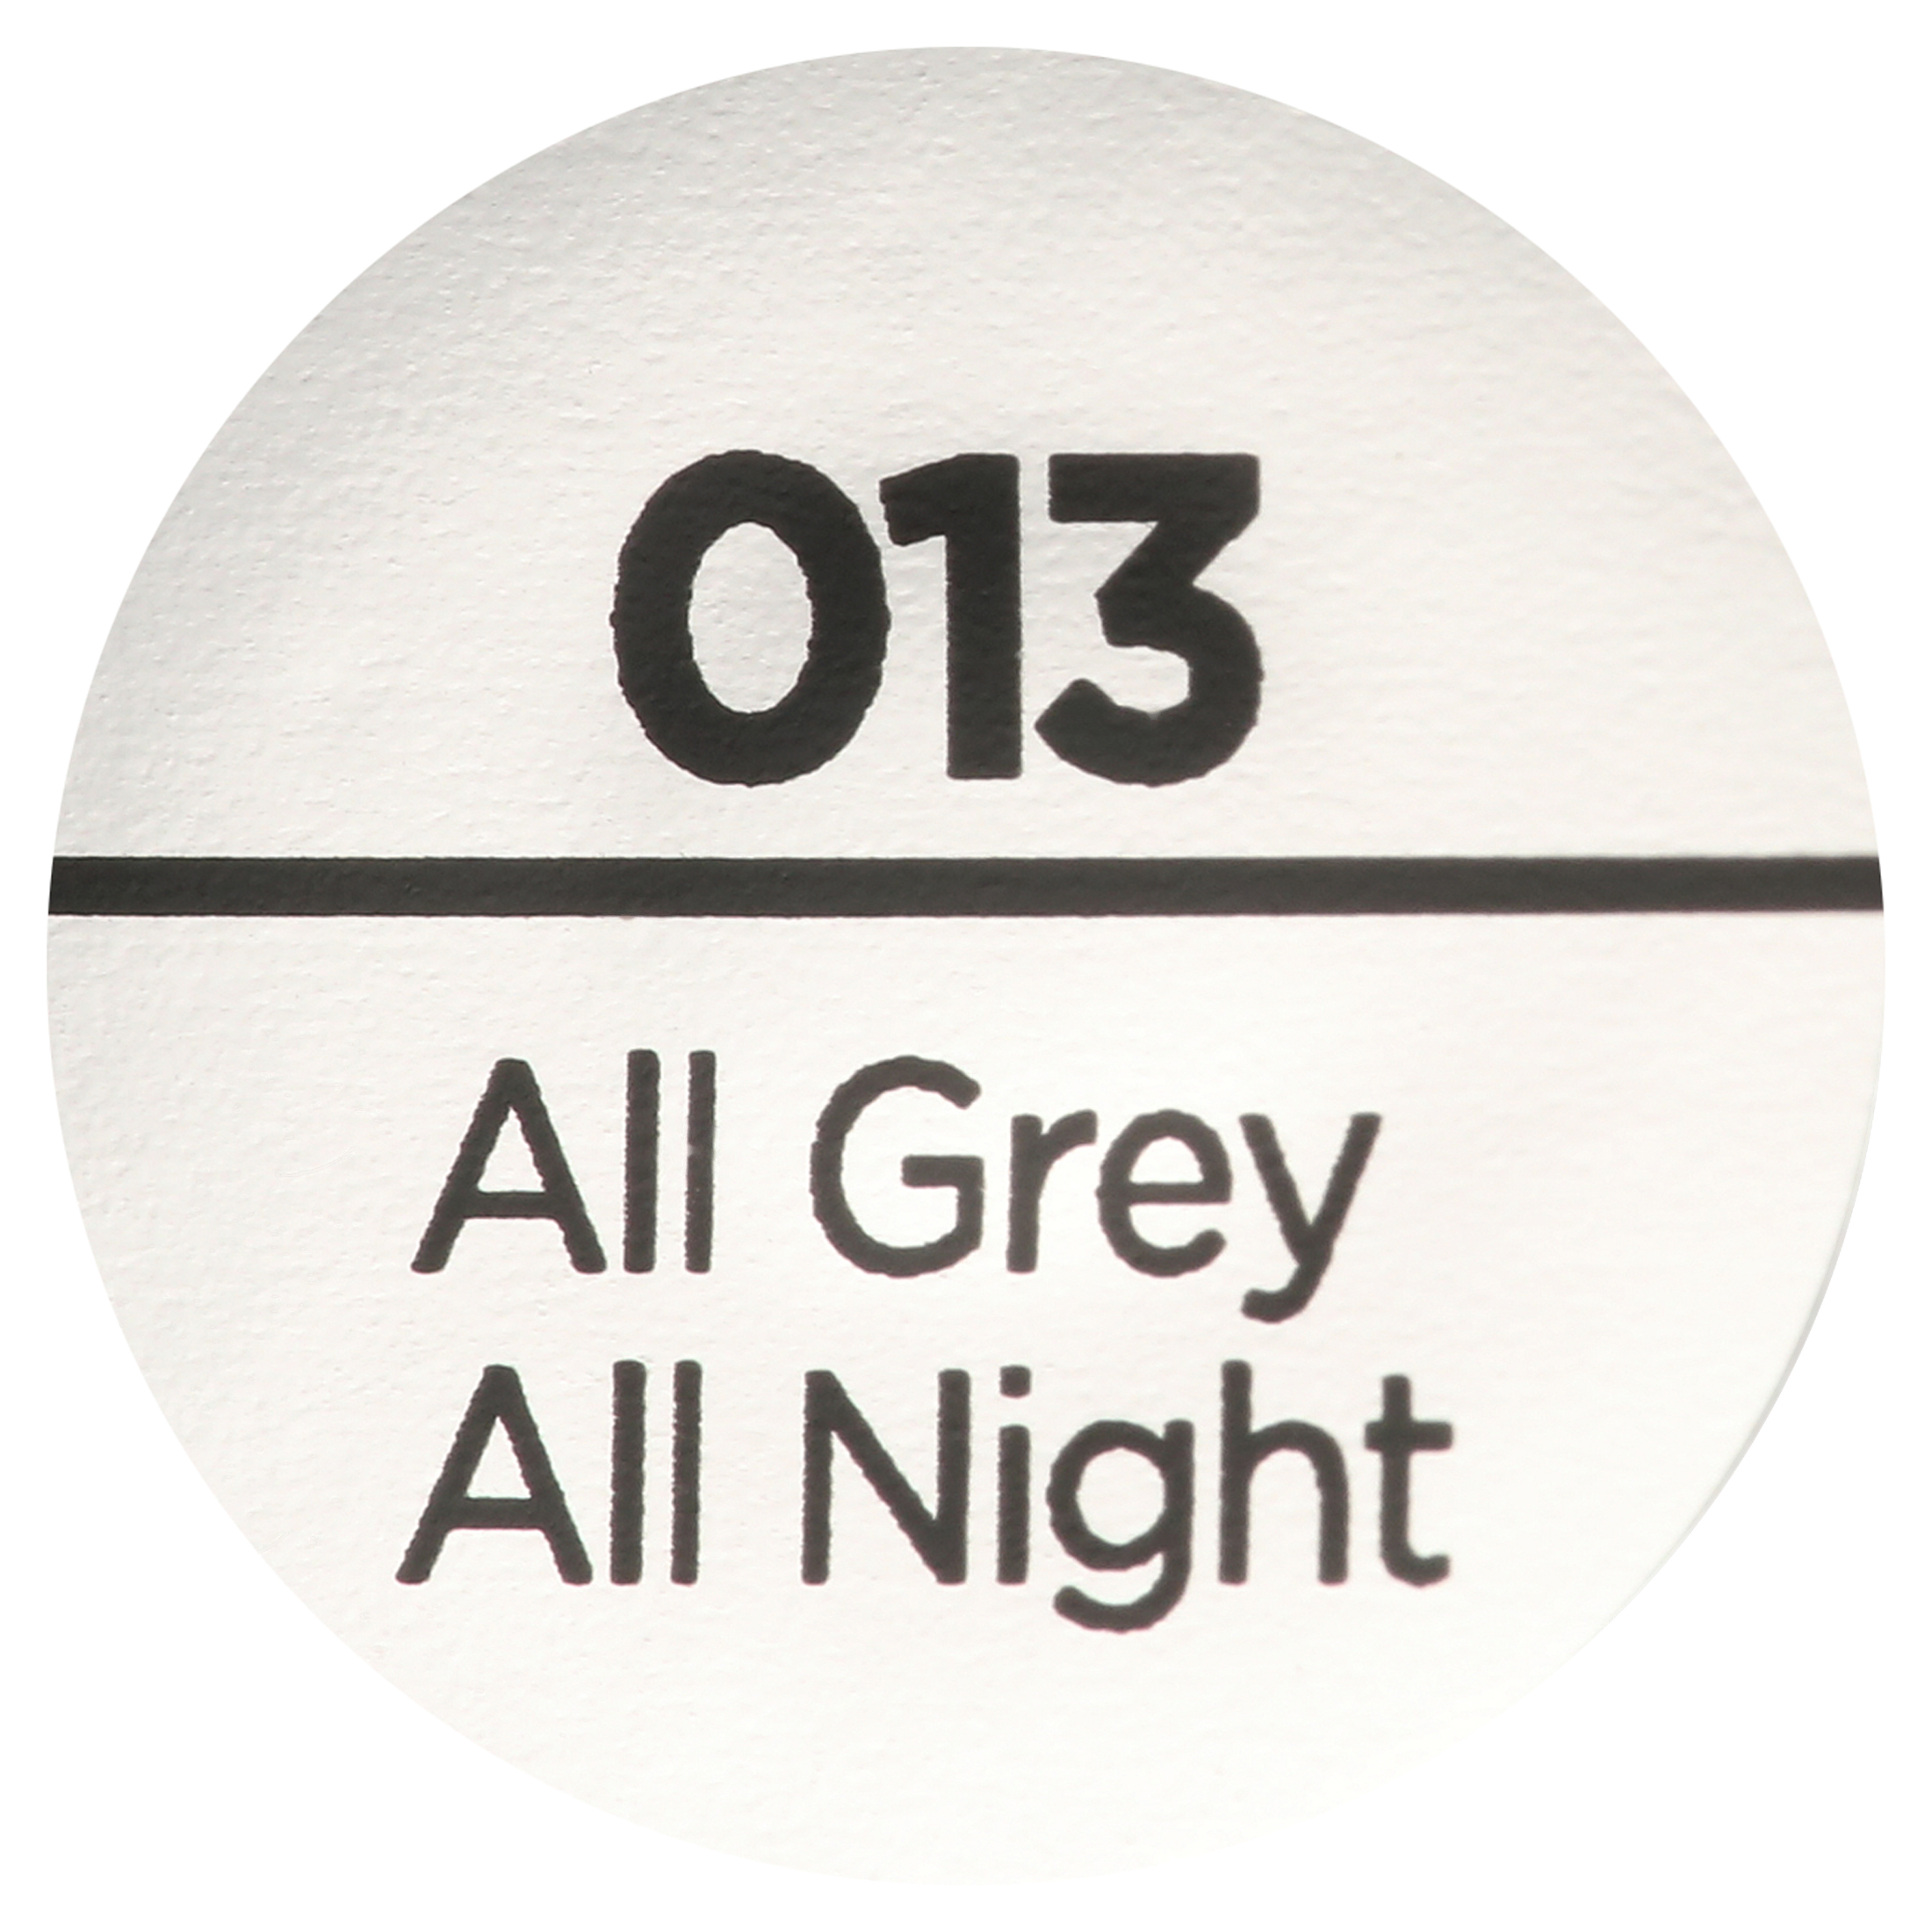 Sally Hansen Complete Salon Manicure Nail Color, All Grey All Night - image 4 of 7